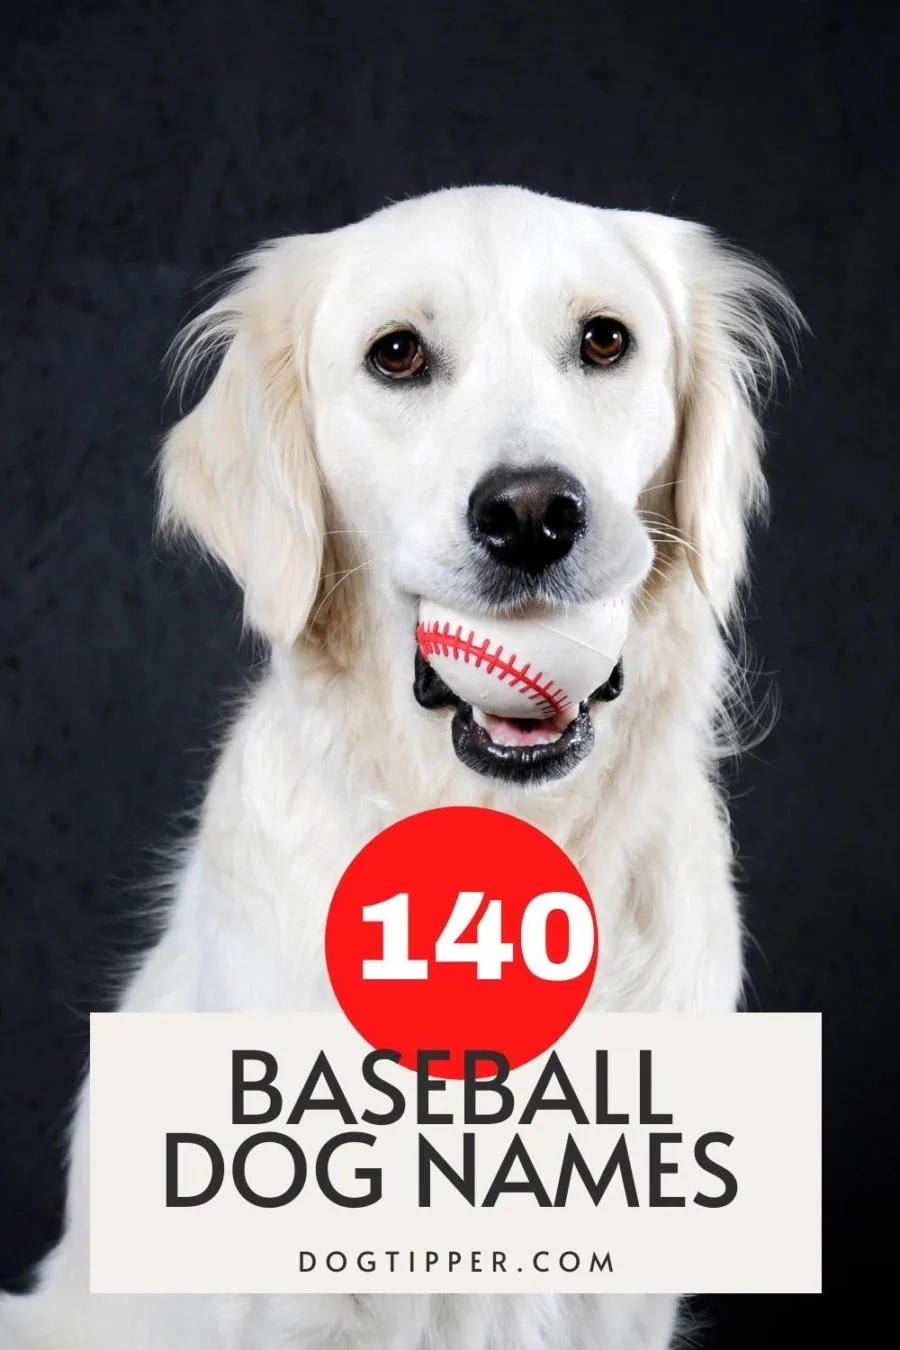 140+ Baseball Dog Names: Knock Your New Dog's Name Out of the Park!